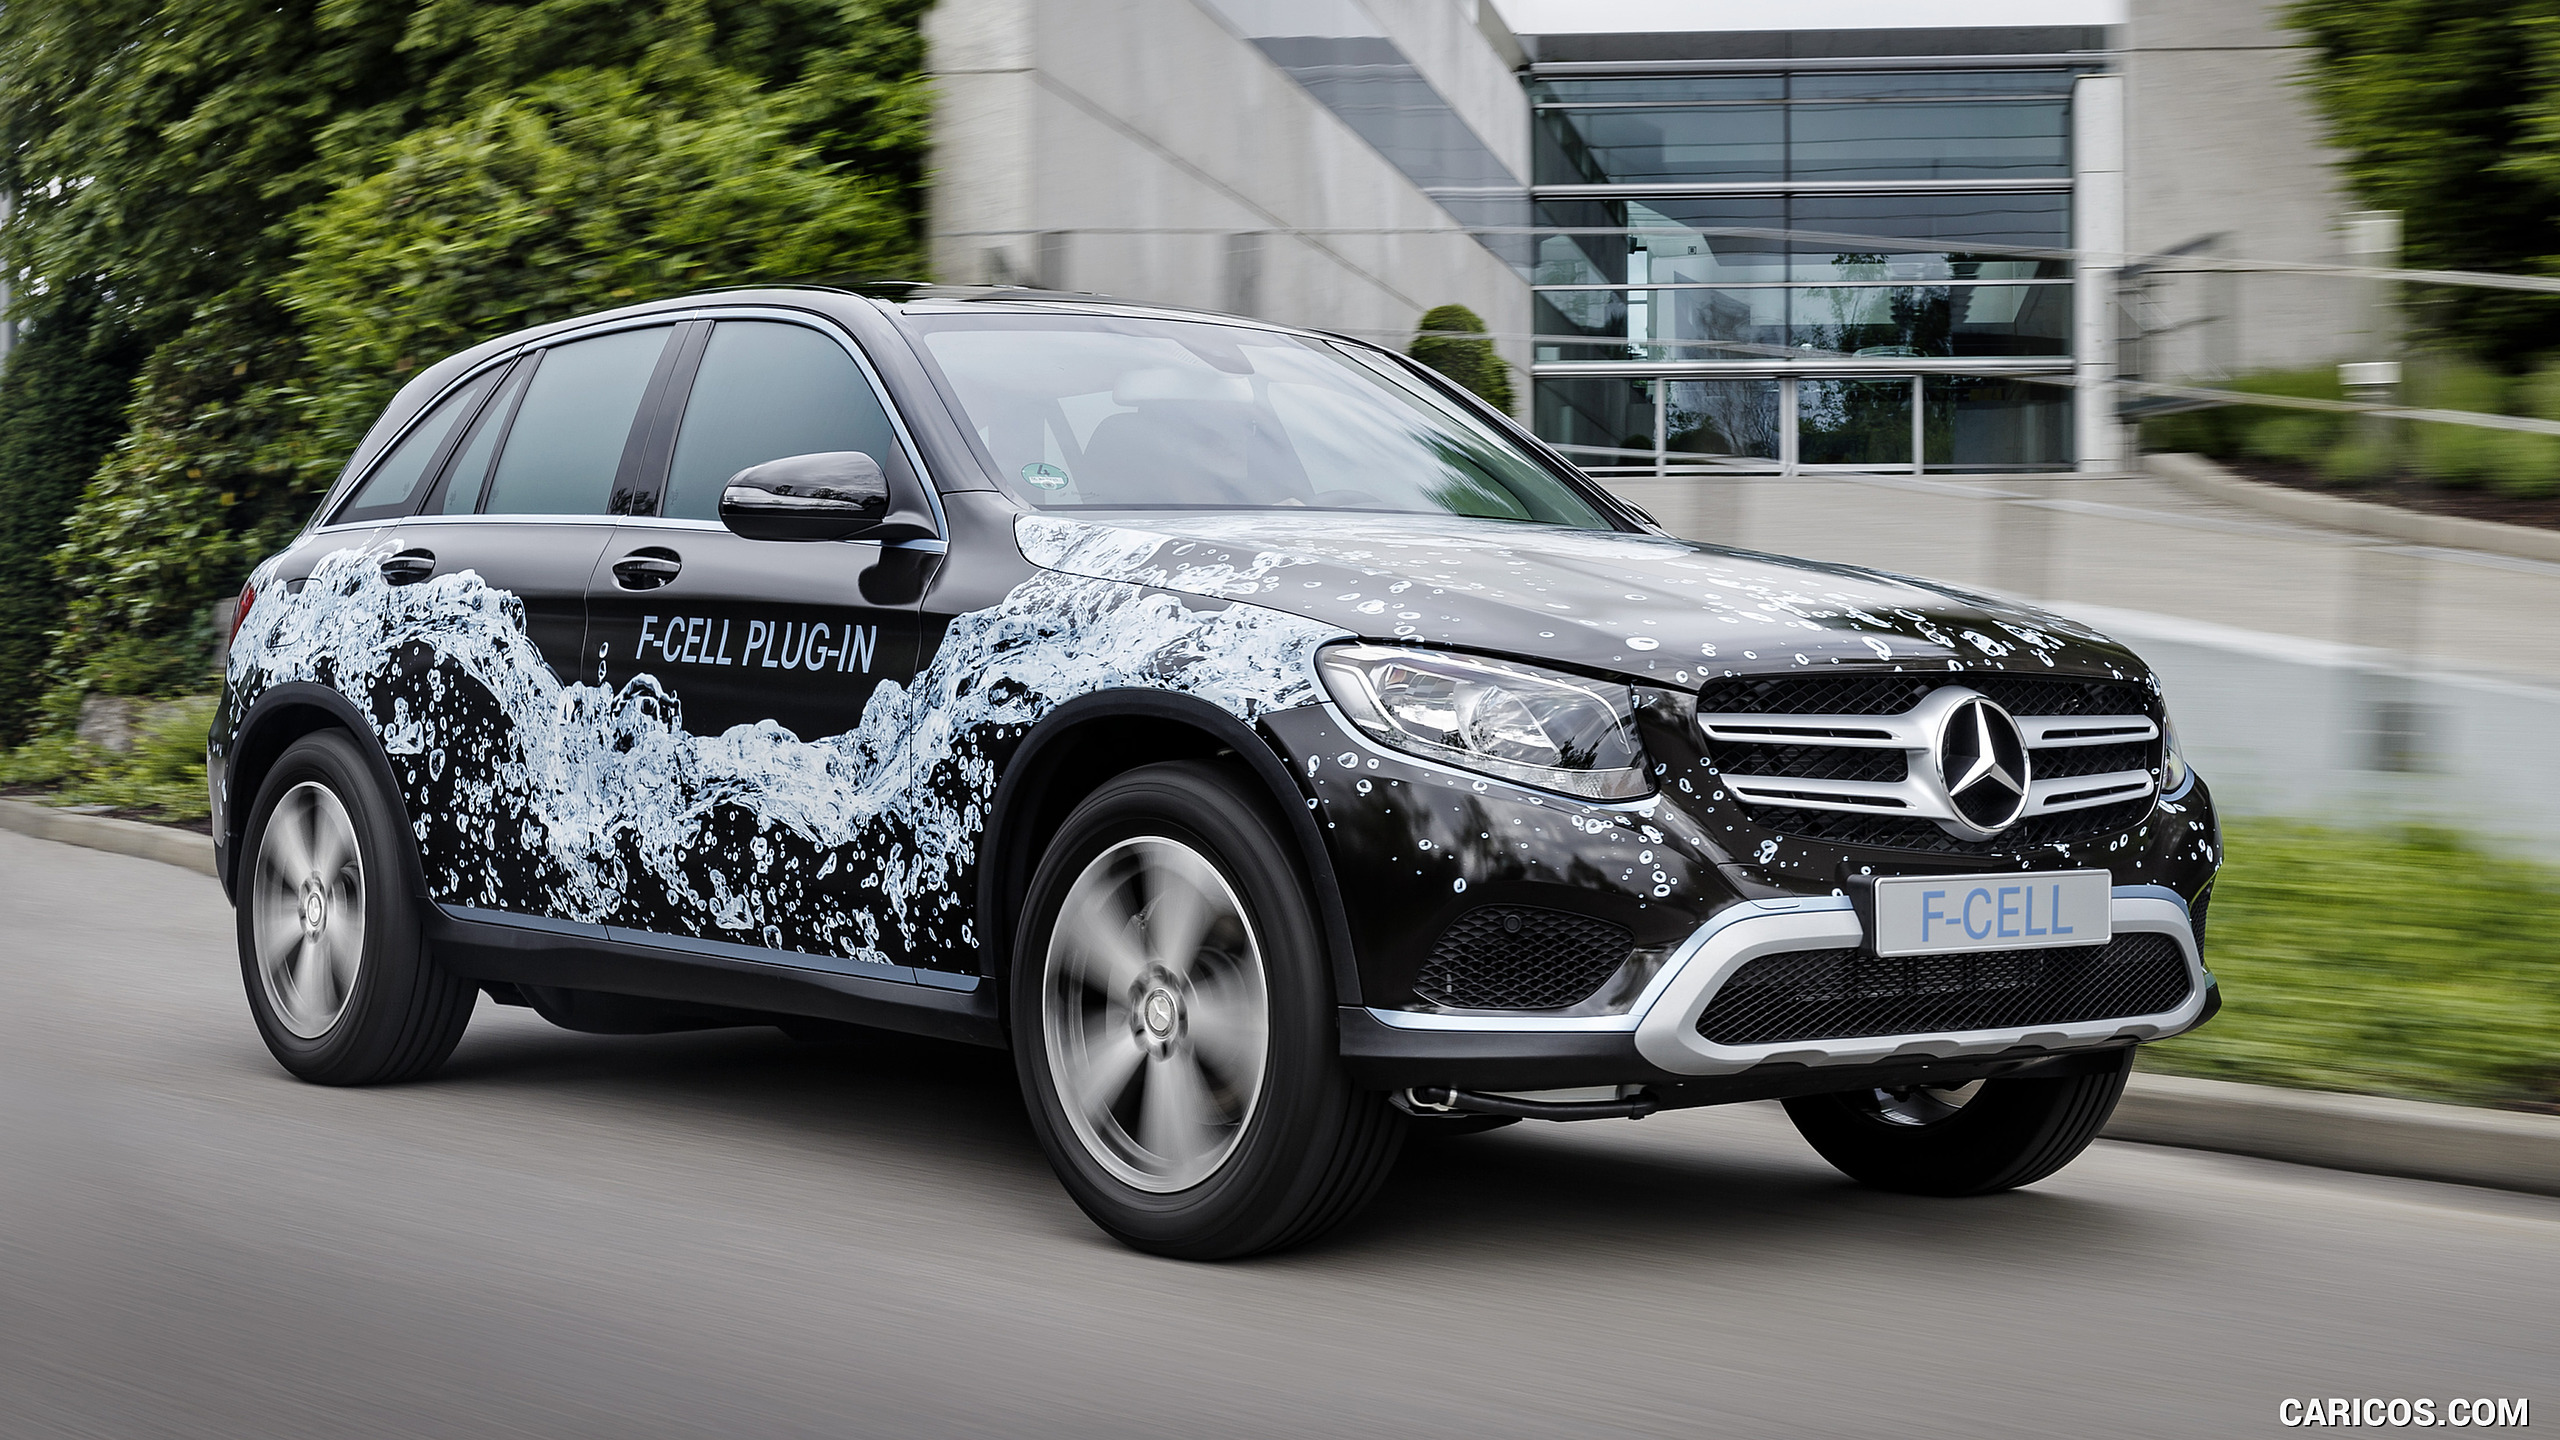 2016 Mercedes-Benz GLC F-Cell Plug-In Concept - Front Three-Quarter, #2 of 20